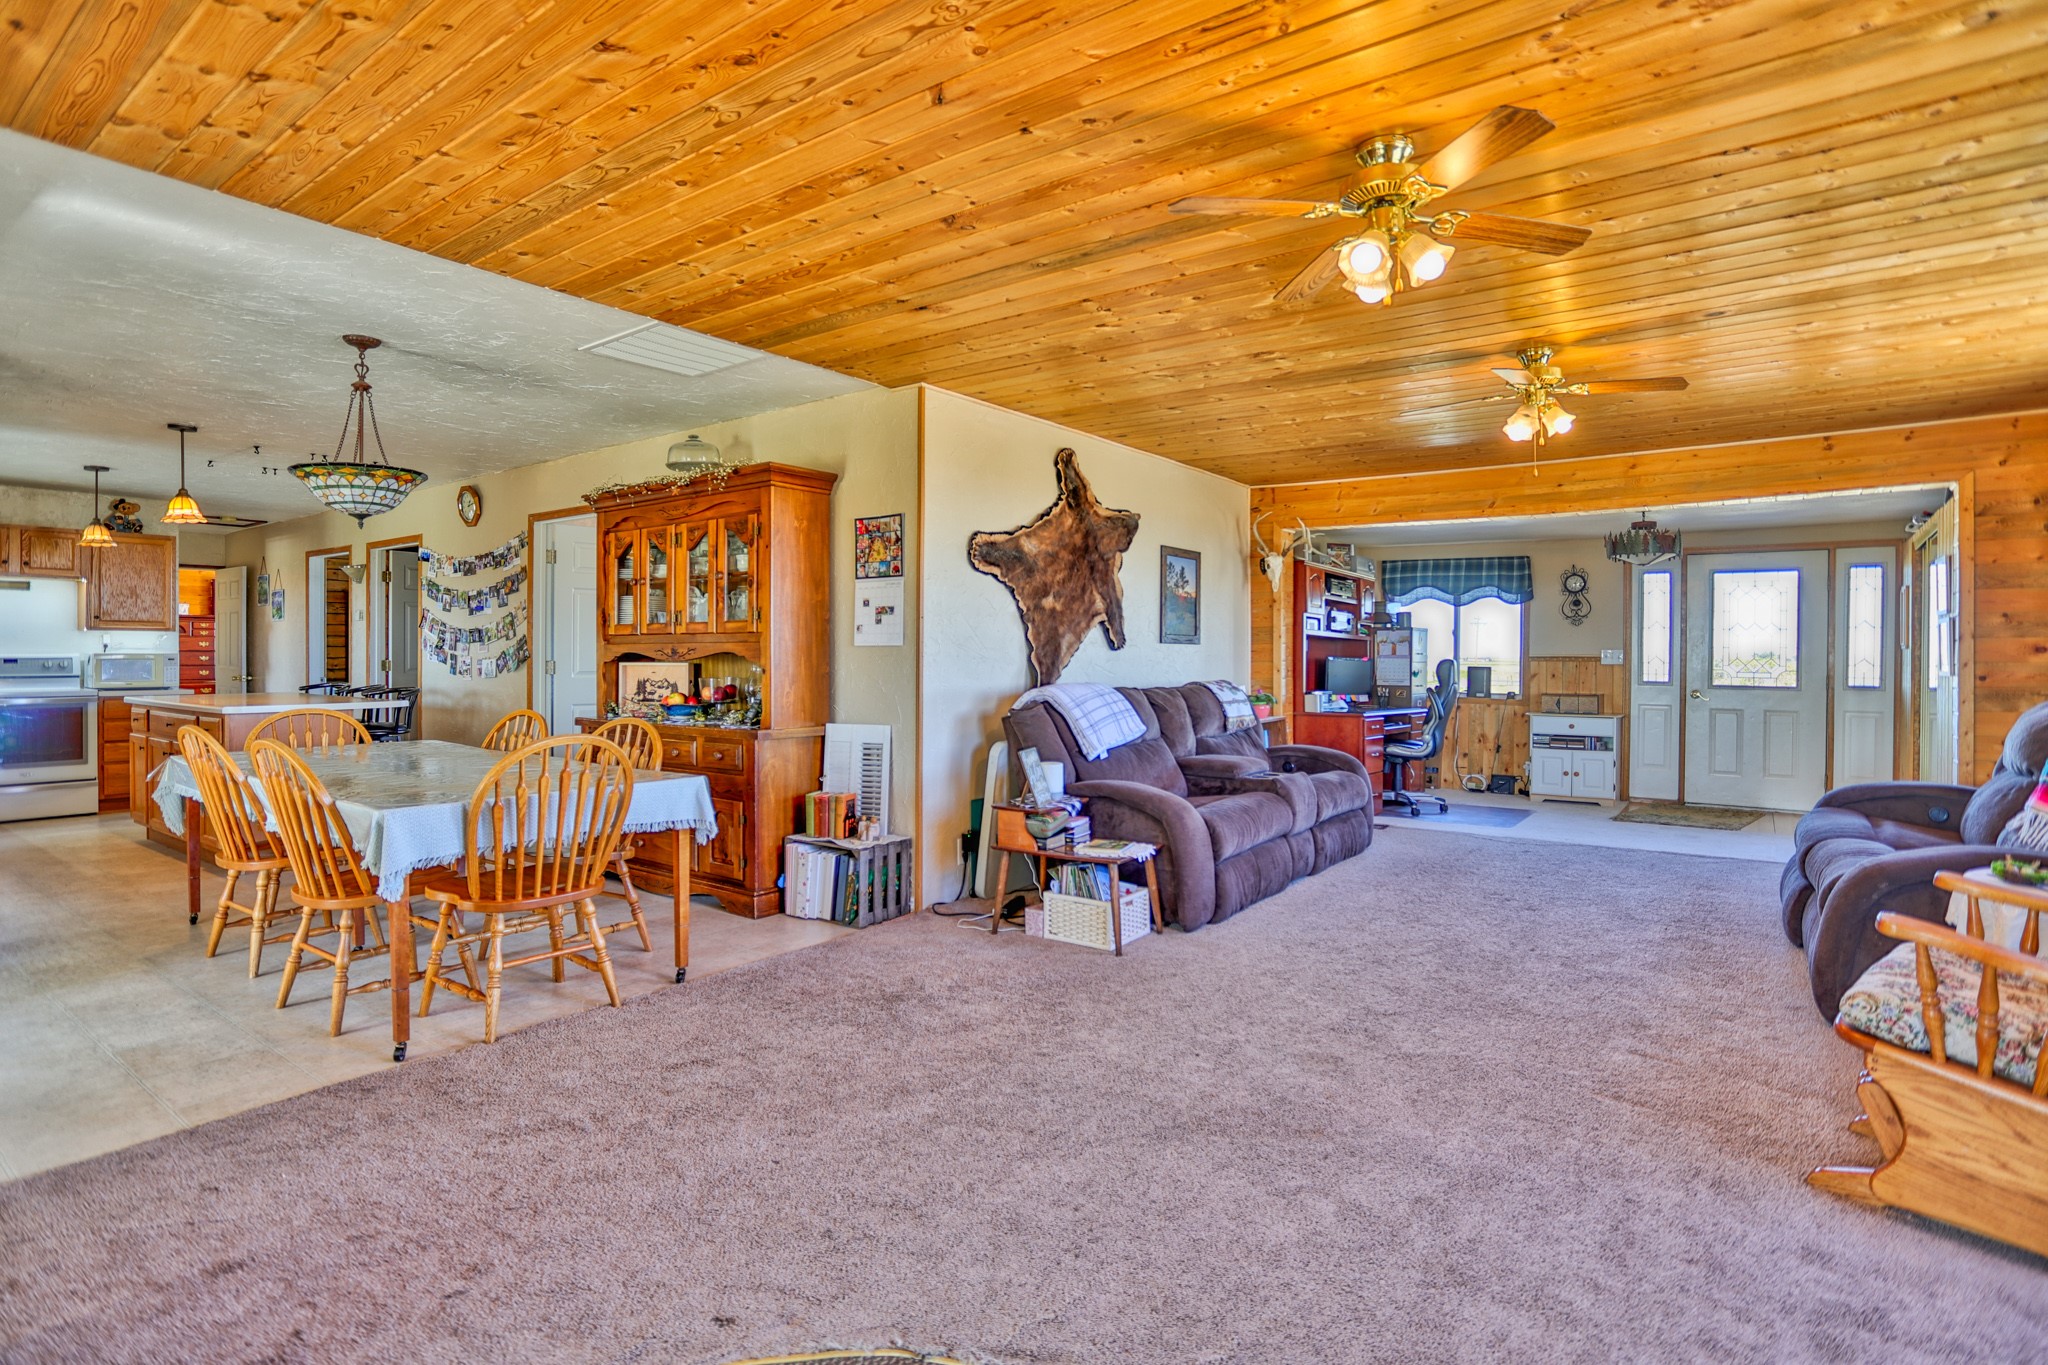 GREAT PRICE, PLUS $5,000 SELLER CREDIT AT CLOSING UPON ACCEPTABLE OFFER to update flooring as you choose!!  Bring your horses home to 5 irrigated acres on the Fairfield bench!  Inside, custom tongue and groove finishes make this single level warm and cozy while large windows throughout add lots of light!  Many recent updates include:  2018 18-20in of insulation added to attic & crawlspace plus furnace with cold air return and vents.  2019 roof and master bath remodel.  2020 dishwasher and main well pump.  2021 bedroom 1 remodel.  2022 new backyard well pump, water heater, bedroom 2 remodel, exterior door, new gravel driveway and parking area, east and north side porches and concrete patio.  RV parking spot w electrical hookup and water on west side.  This little gem is just waiting for your finishing touches!  Listed by Jen Barnett.